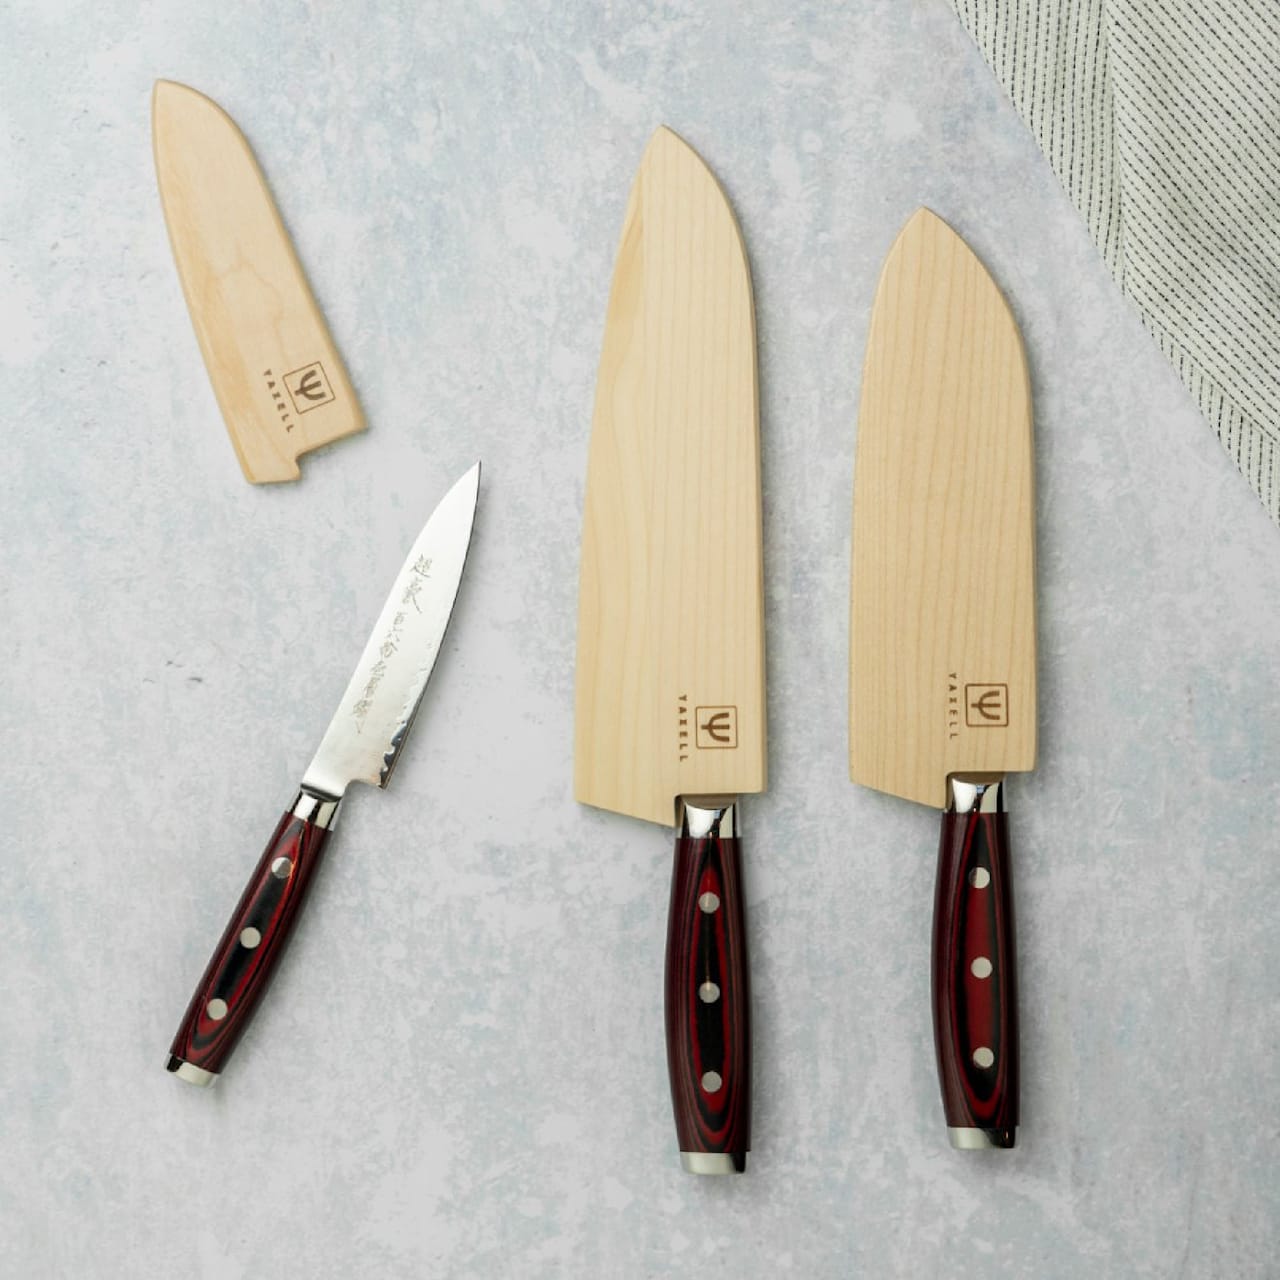 Yaxell Knife guard in Maple 12 cm